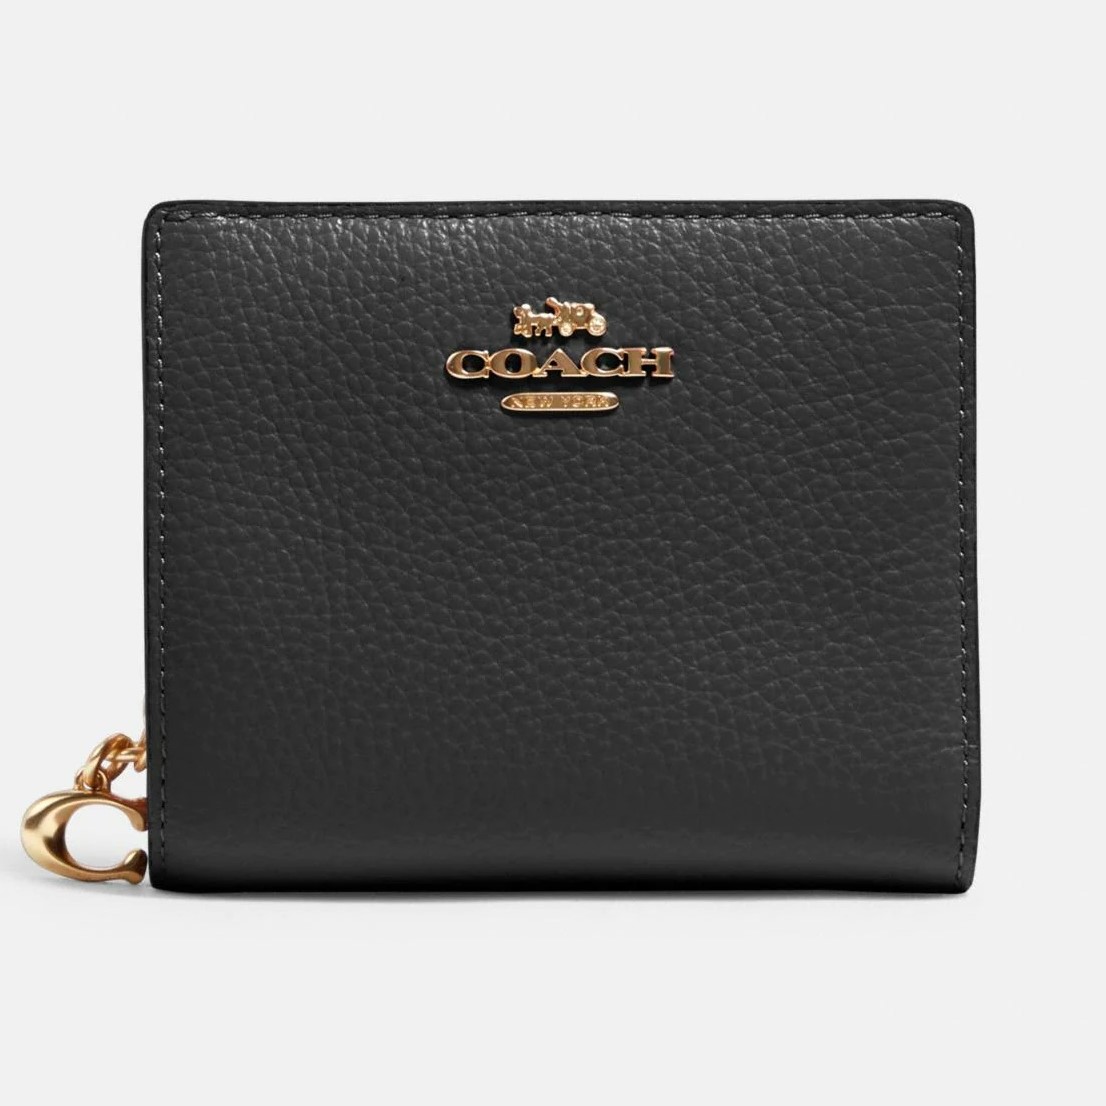 VÍ NGẮN COACH SMALL WALLET PEBBLE LEATHER SNAP WALLET 5